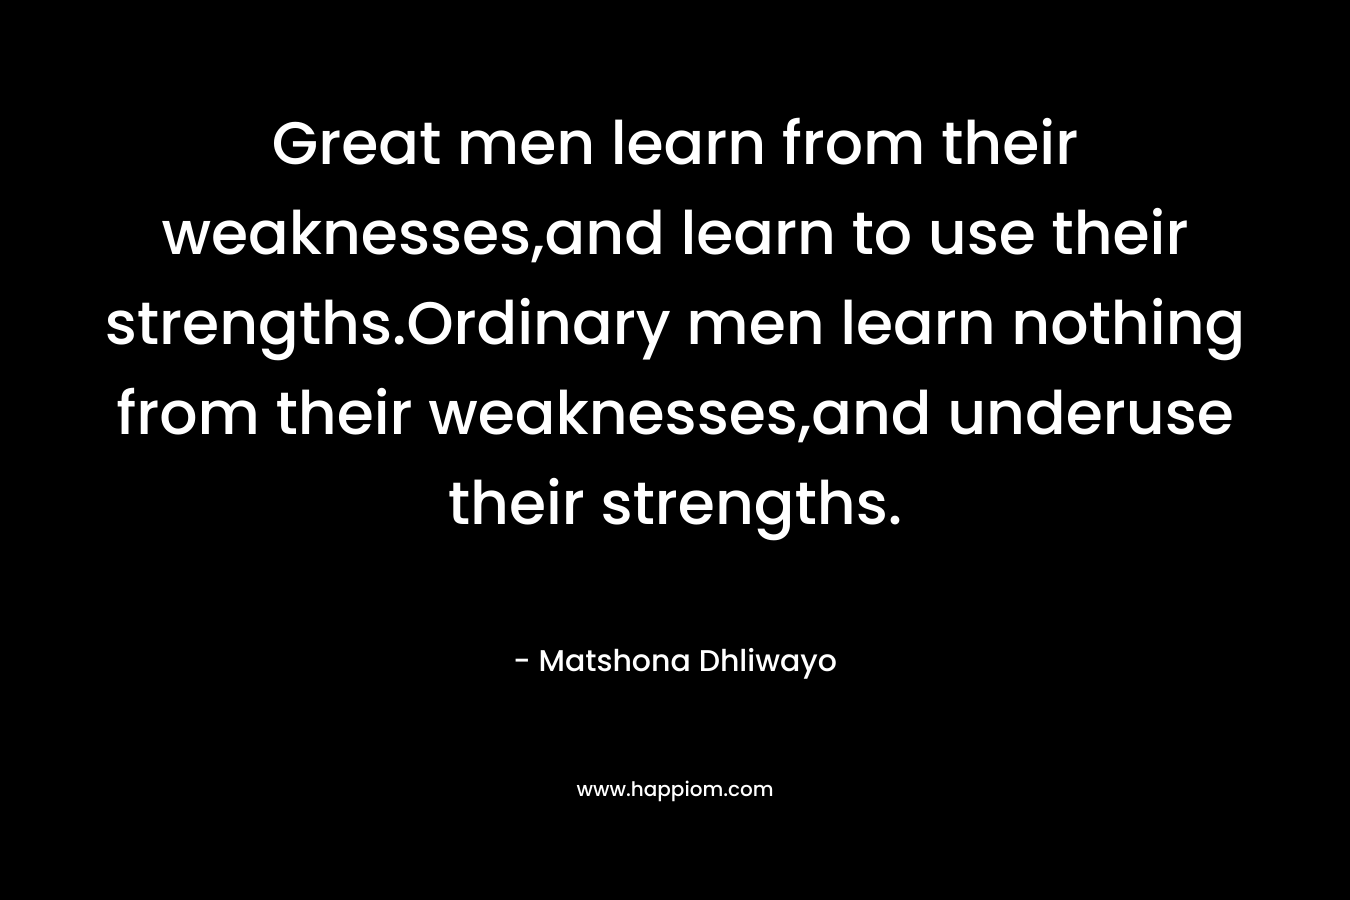 Great men learn from their weaknesses,and learn to use their strengths.Ordinary men learn nothing from their weaknesses,and underuse their strengths.